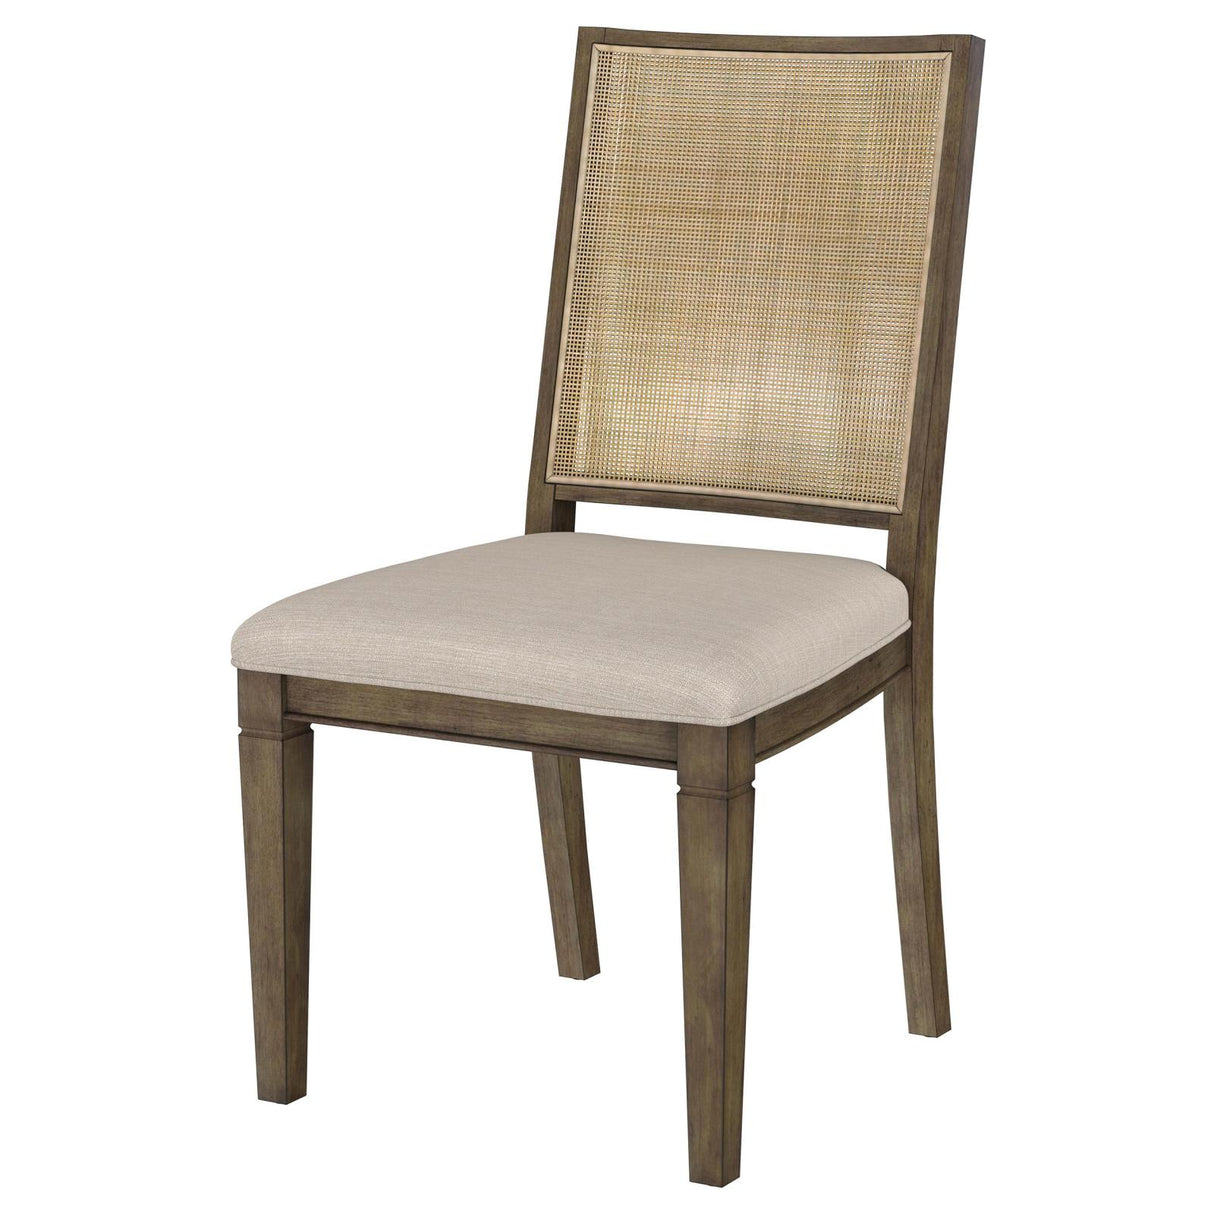 Matisse Woven Rattan Back Dining Side Chair with Upholstered Seat Brown - 108312